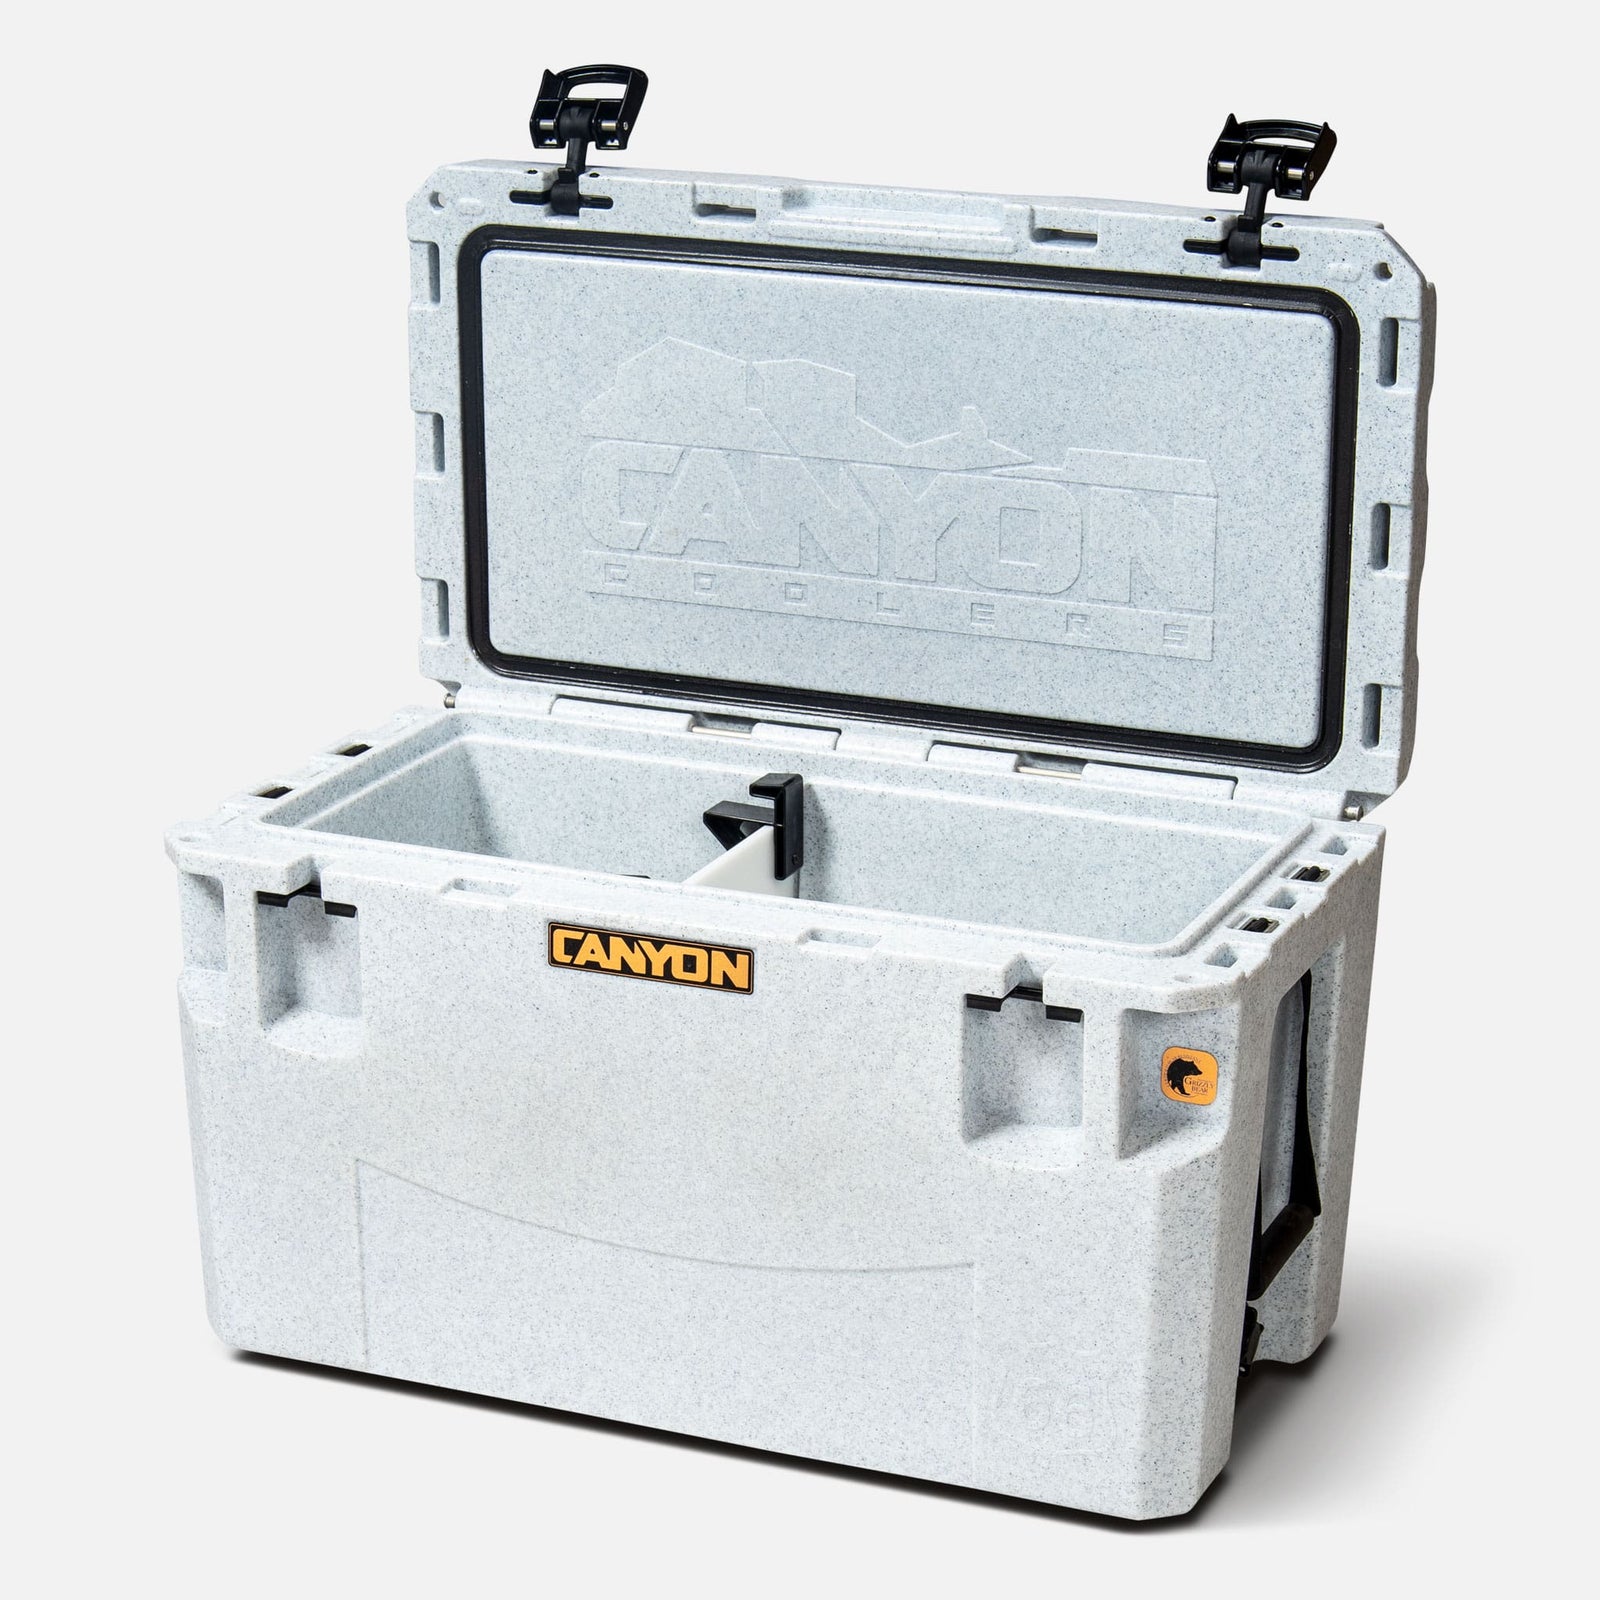 Outfitter 75 Quart Cooler - Canyon Coolers